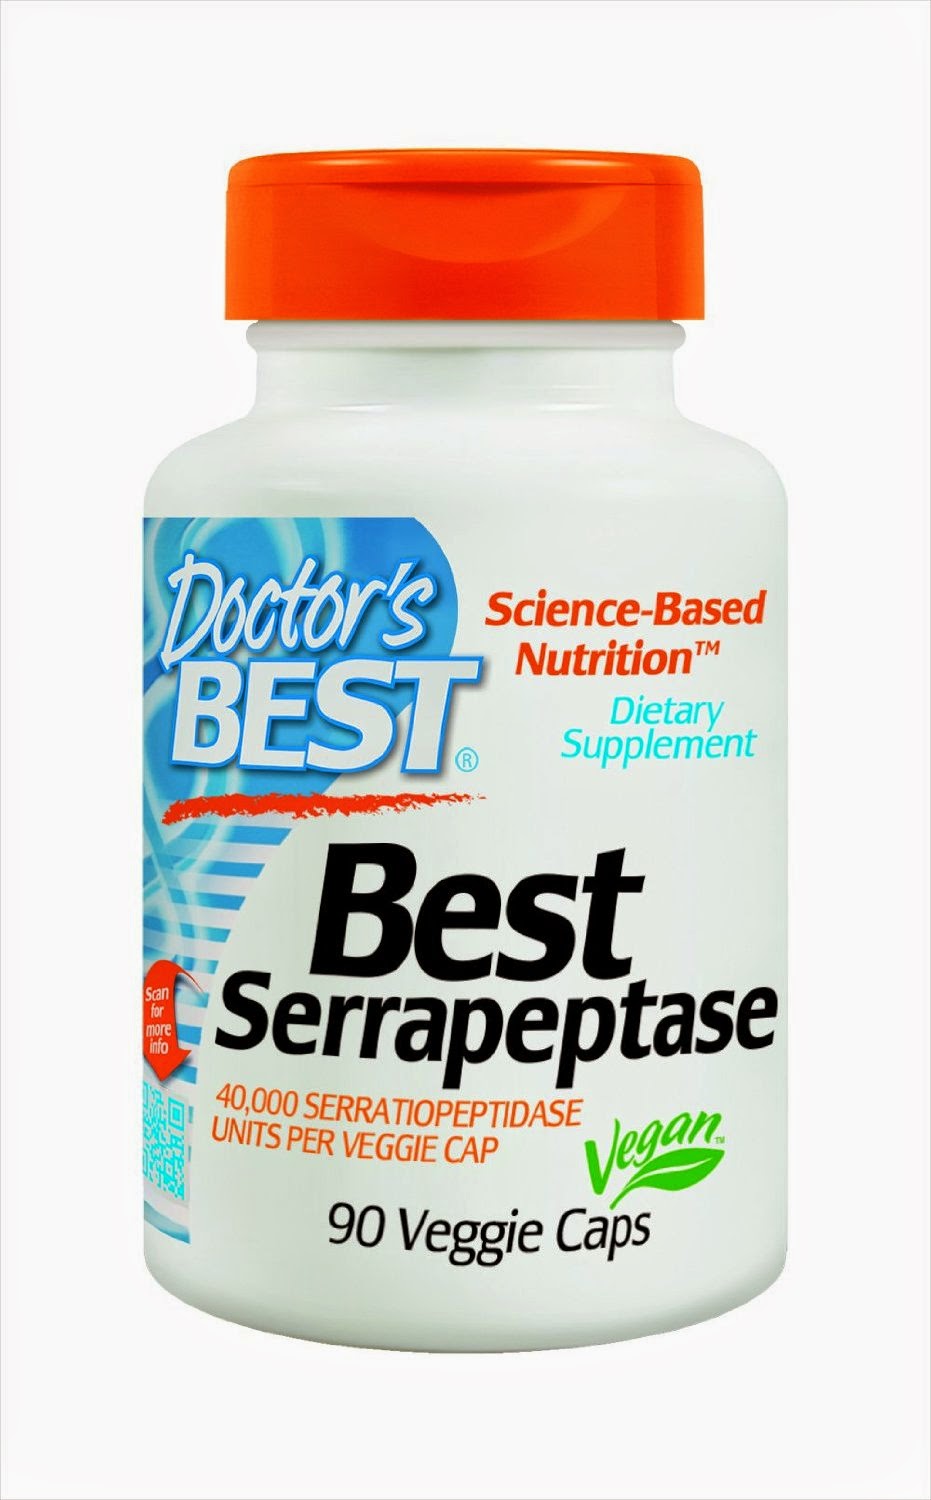 What are the uses and side effects of serrapeptase?